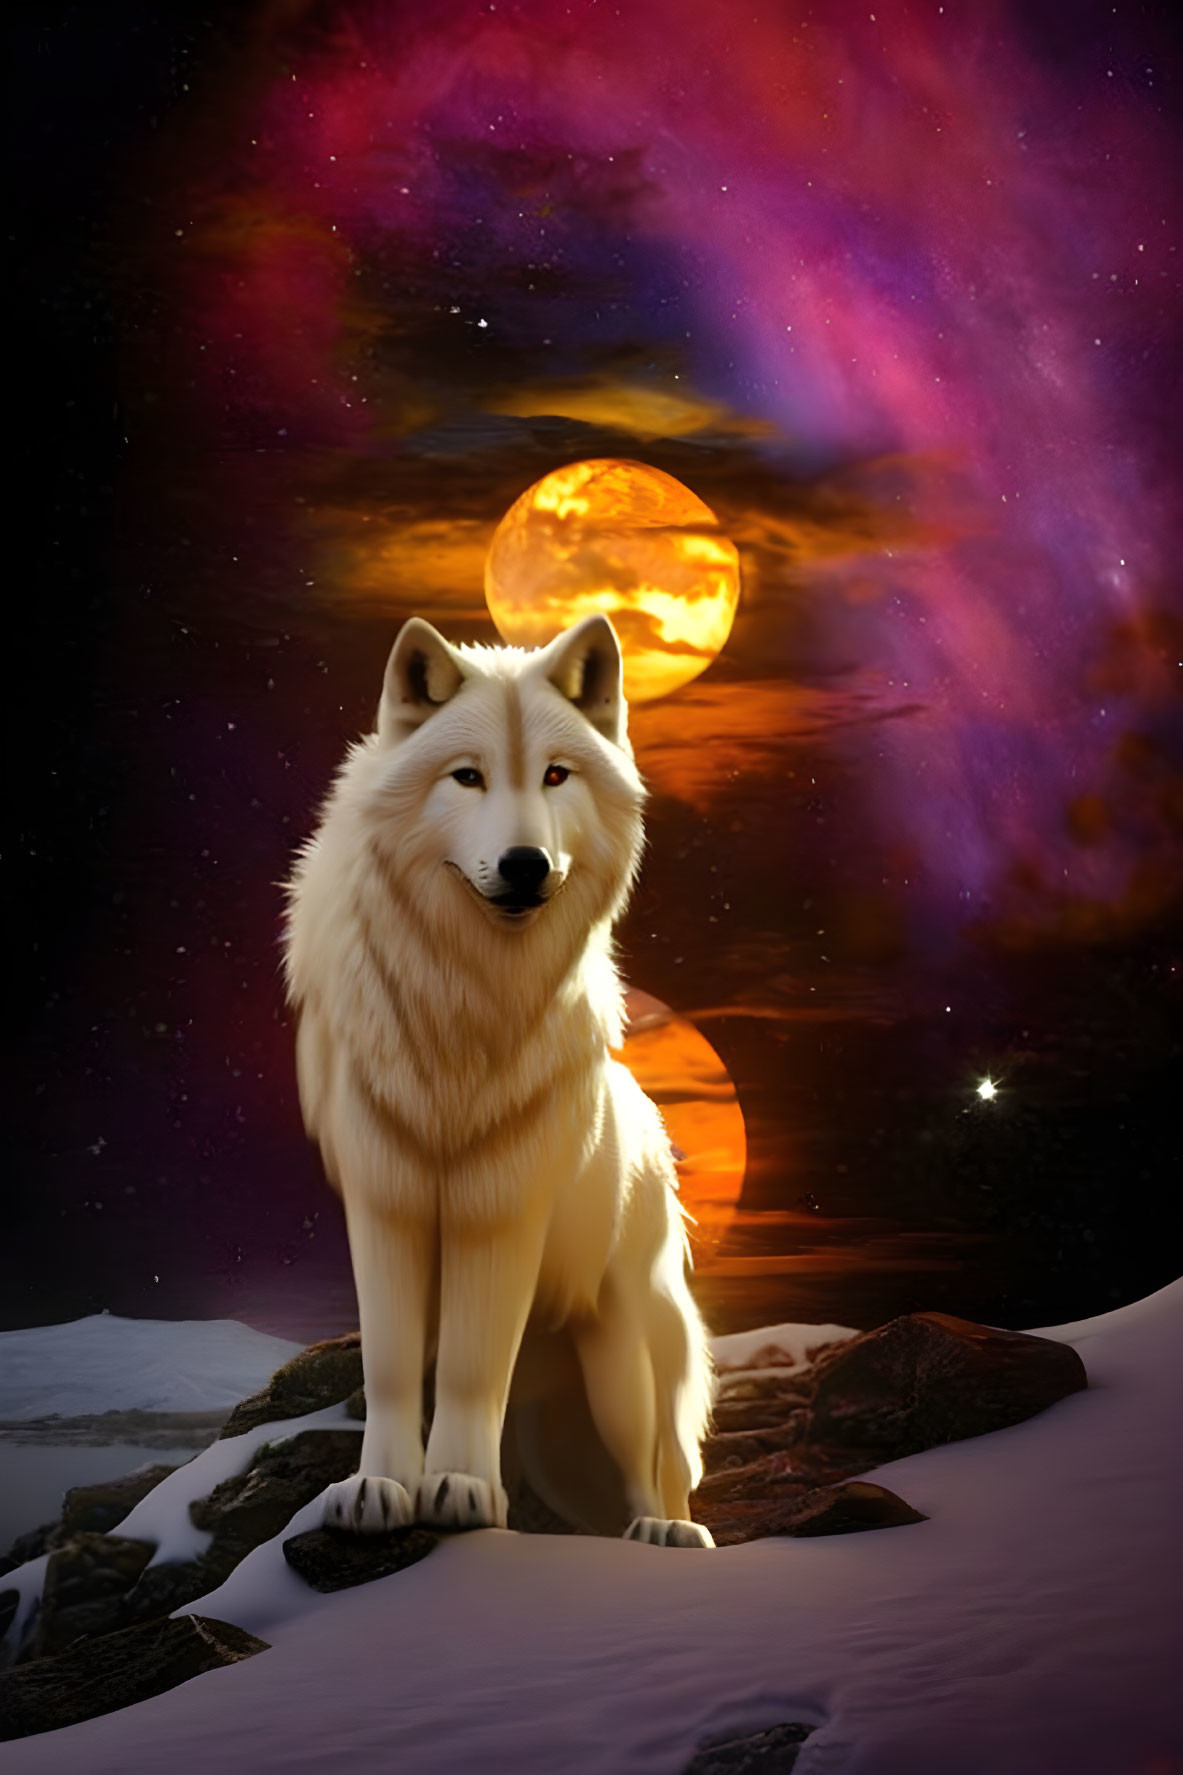 White Wolf in Snowy Landscape with Galaxy Background and Full Moon